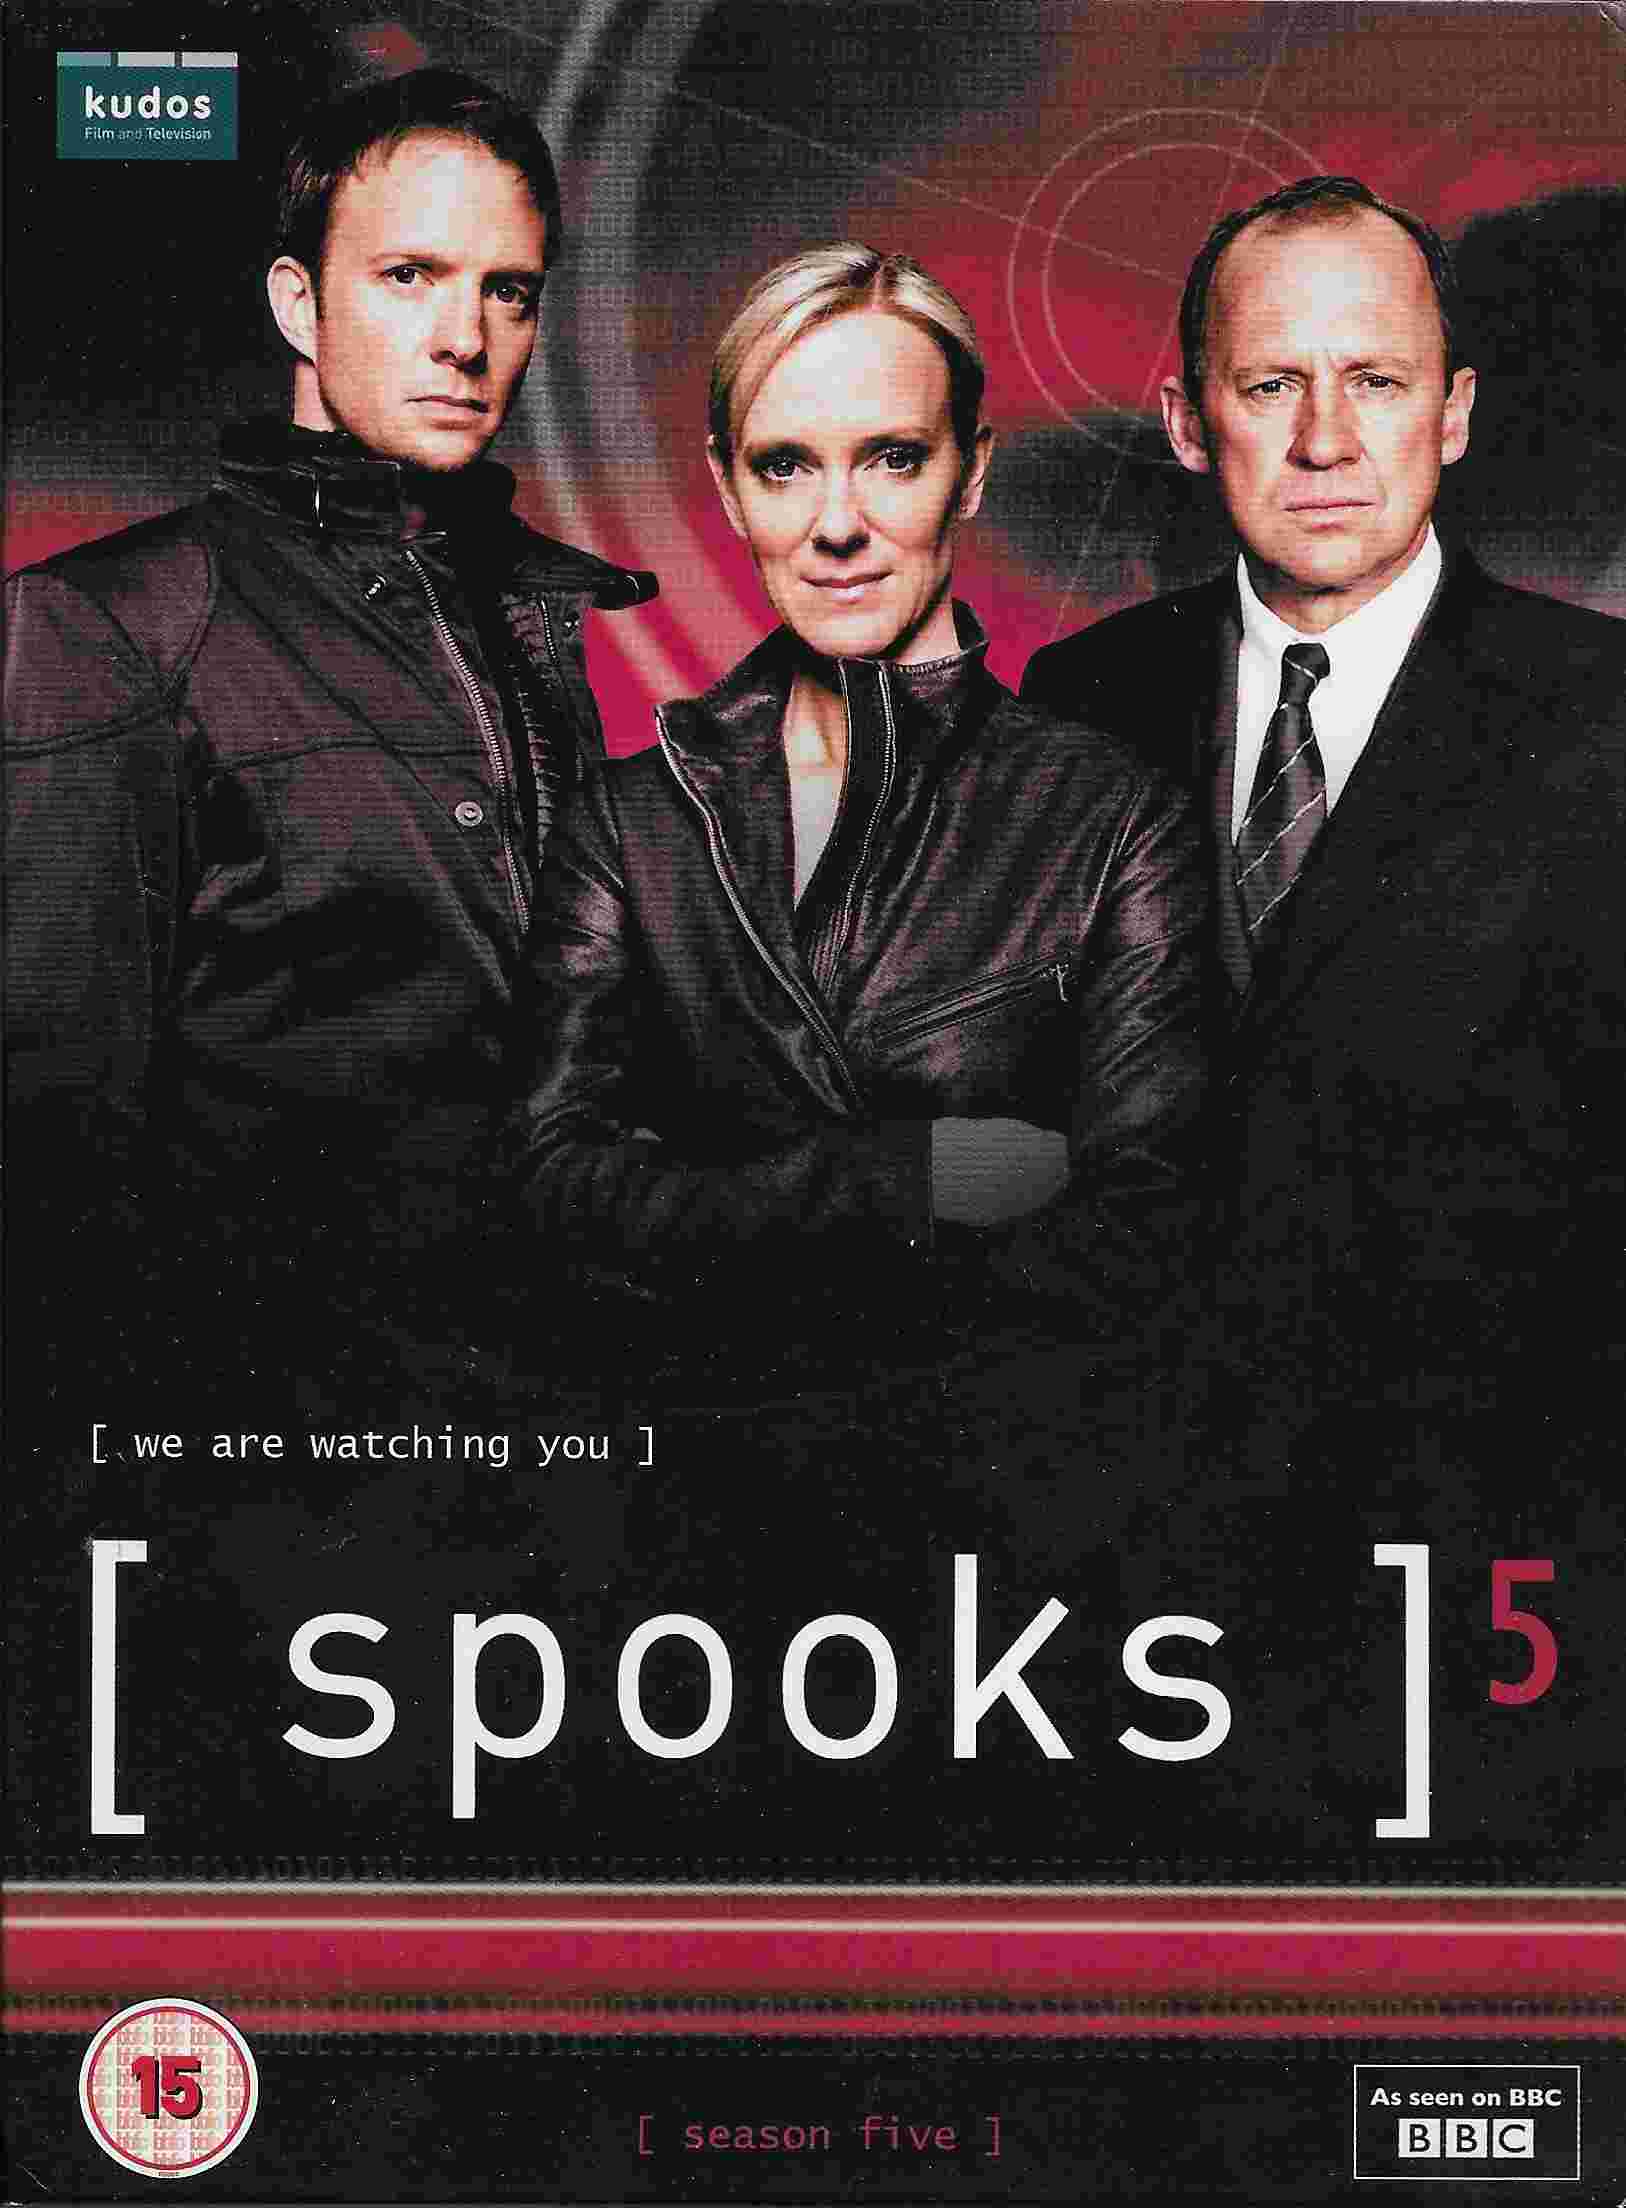 Picture of [ spooks ]5 by artist Ben Richards / David Farr / Zinnie Harris / Raymond Khoury / Julian Simpson / Neil Cross from the BBC dvds - Records and Tapes library